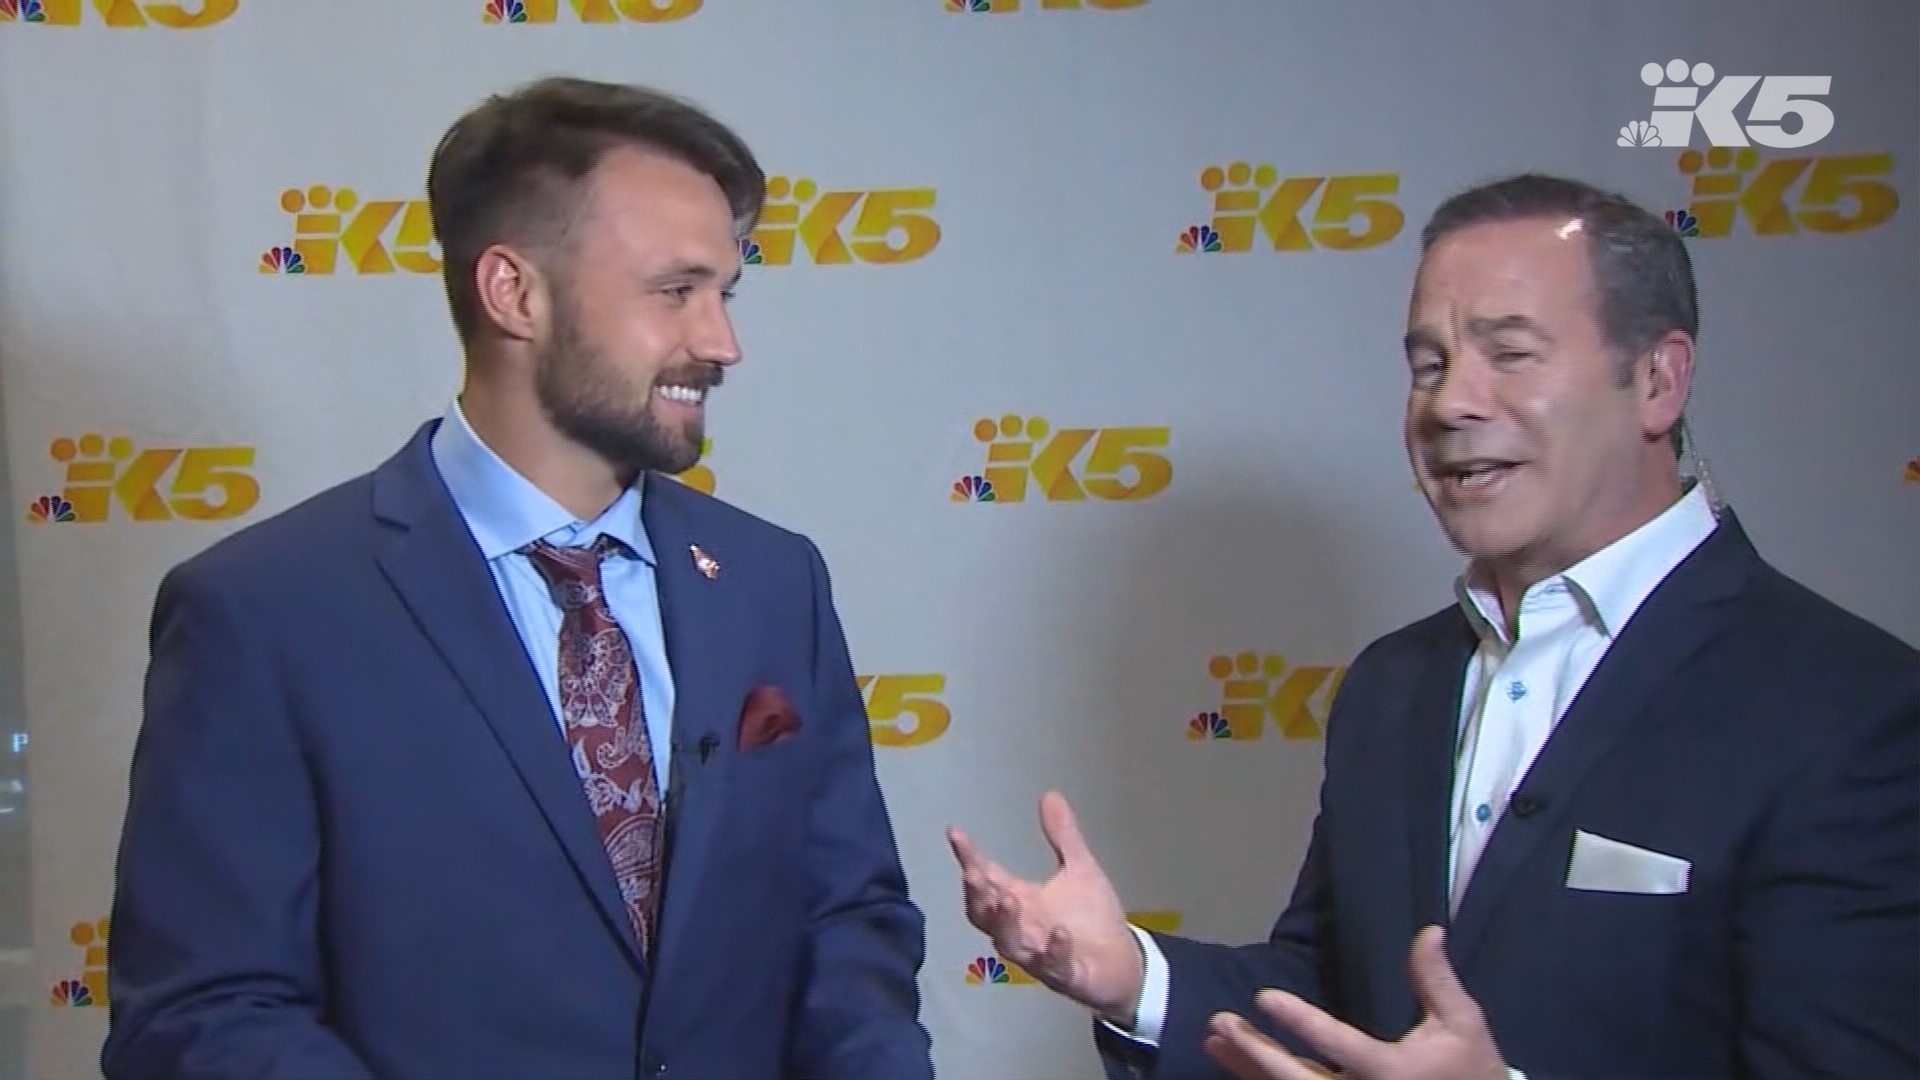 Male Sports Star of the Year and Washington State University quarterback Gardner Minshew stops by to talk to Paul Silvi at the MTR Western Sports Star Awards